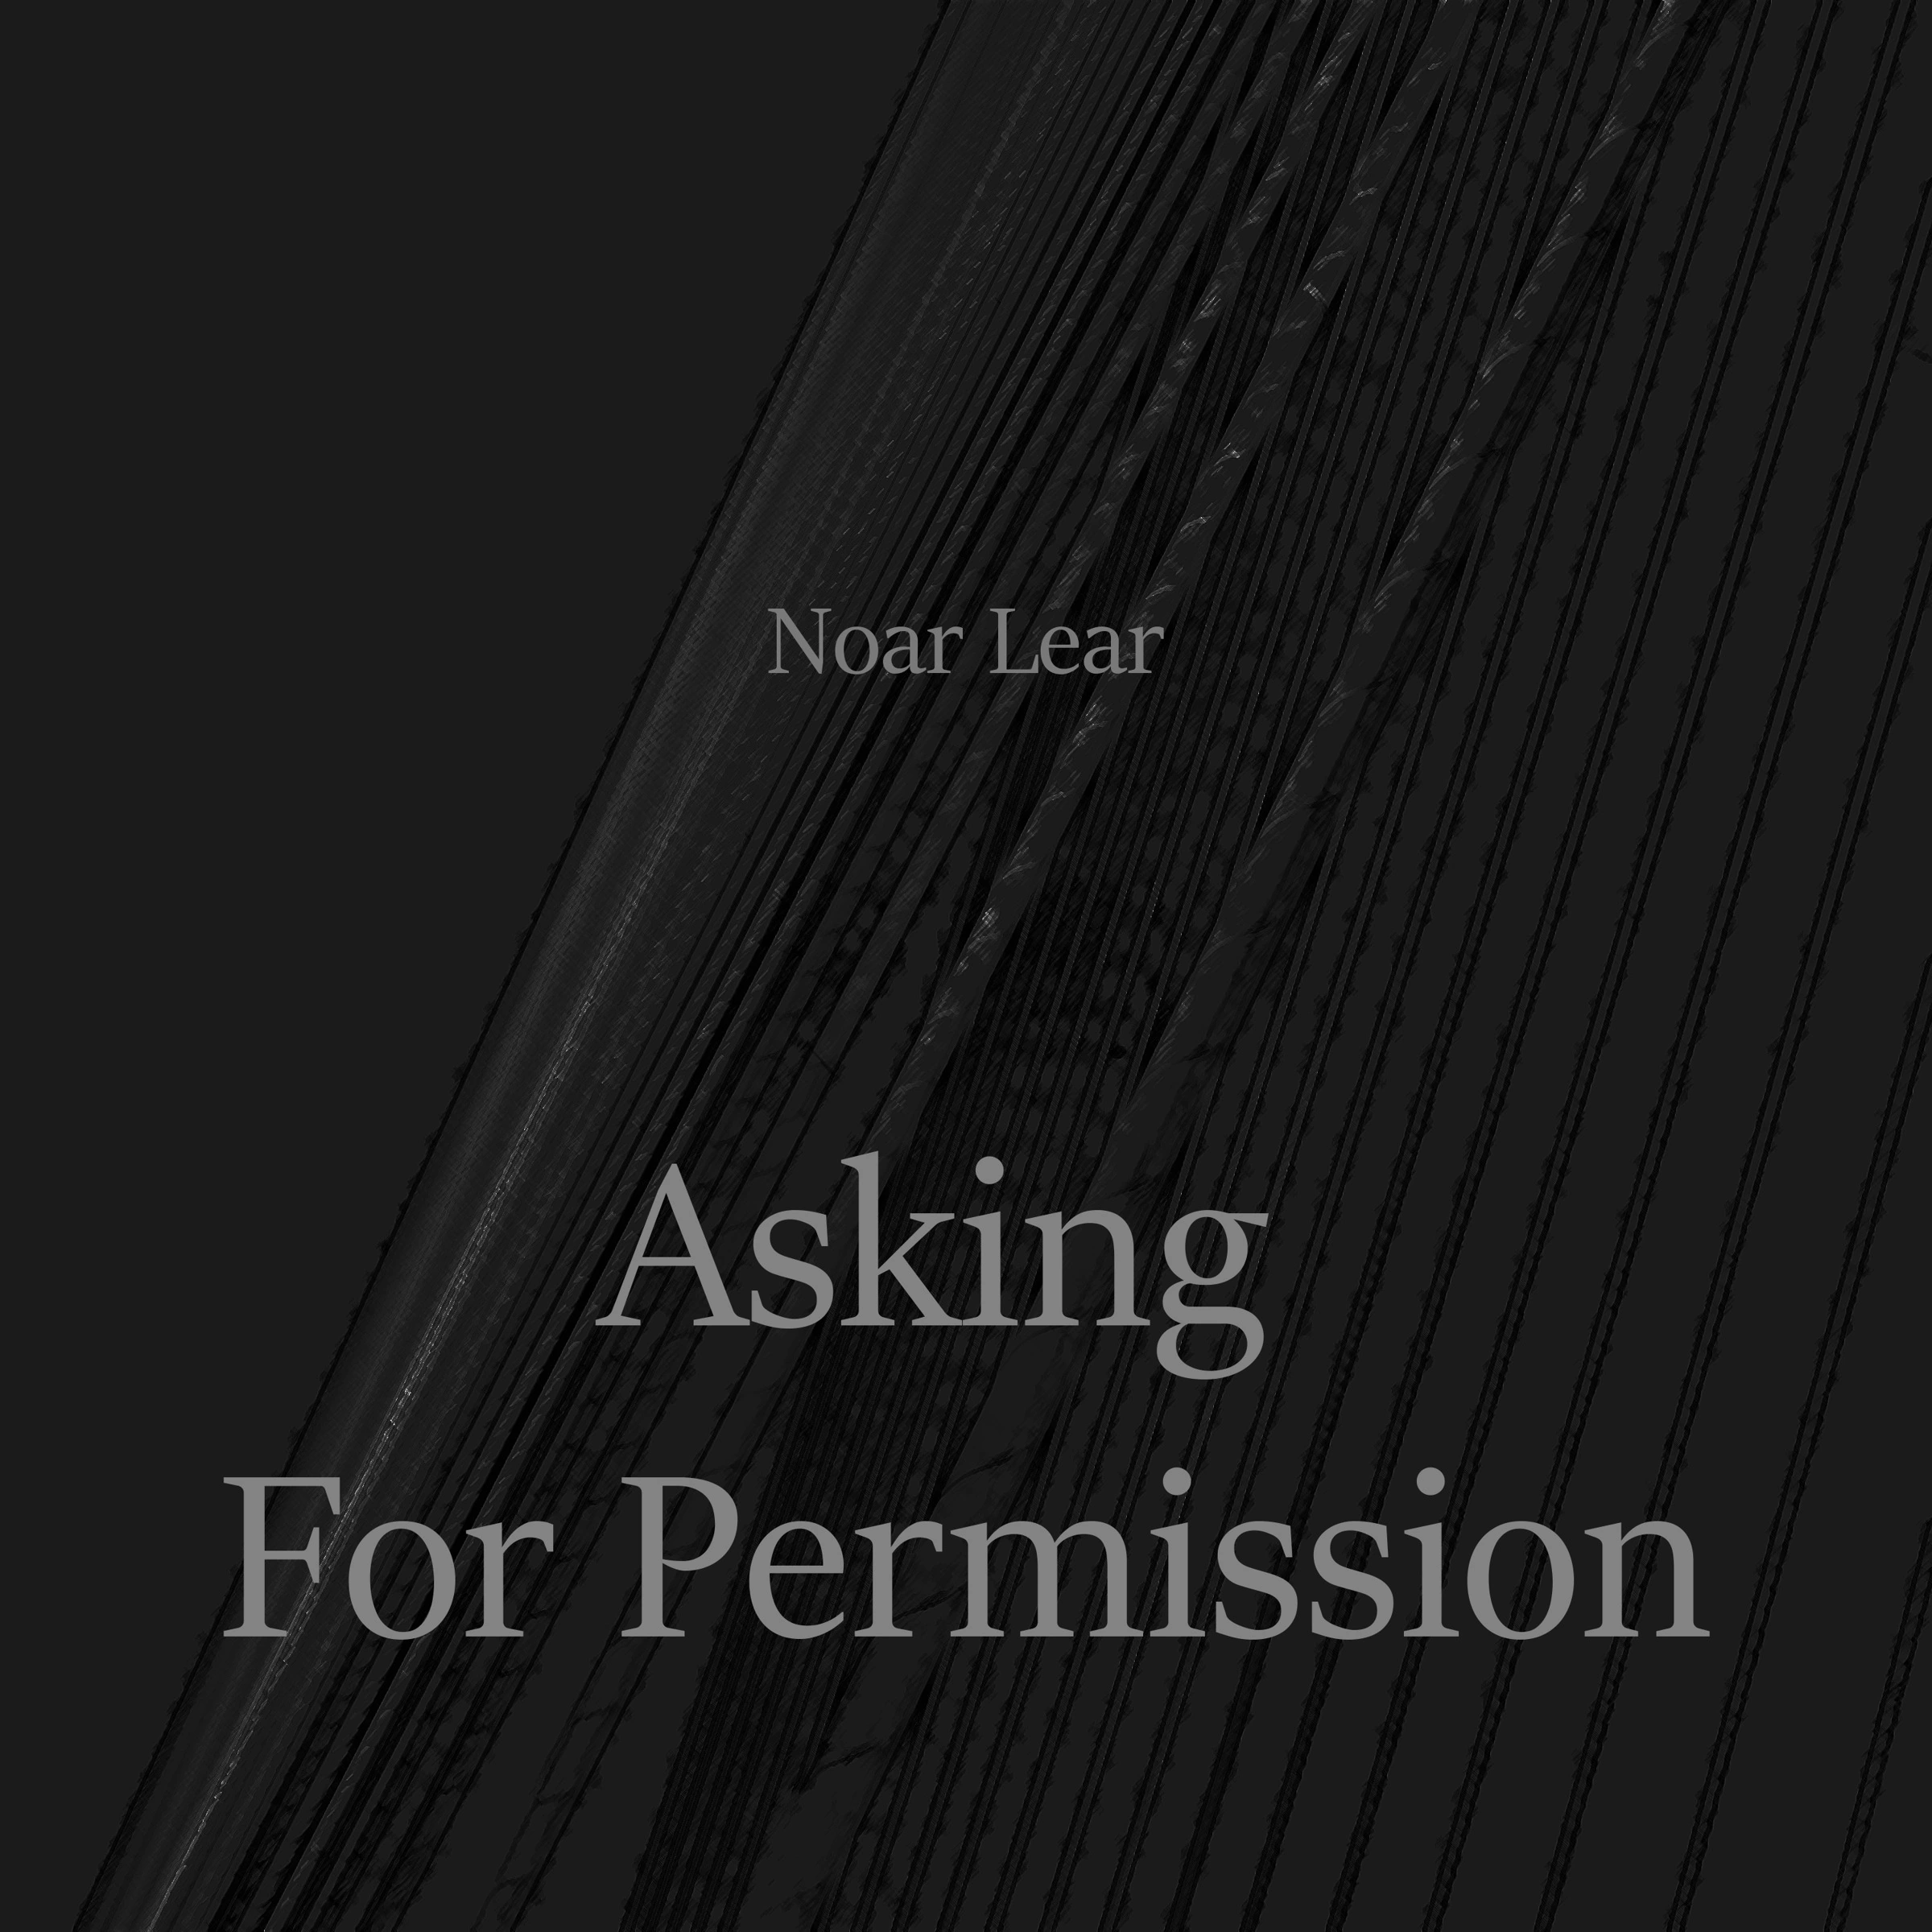 Asking For Permission by Noar Lear Audiobook